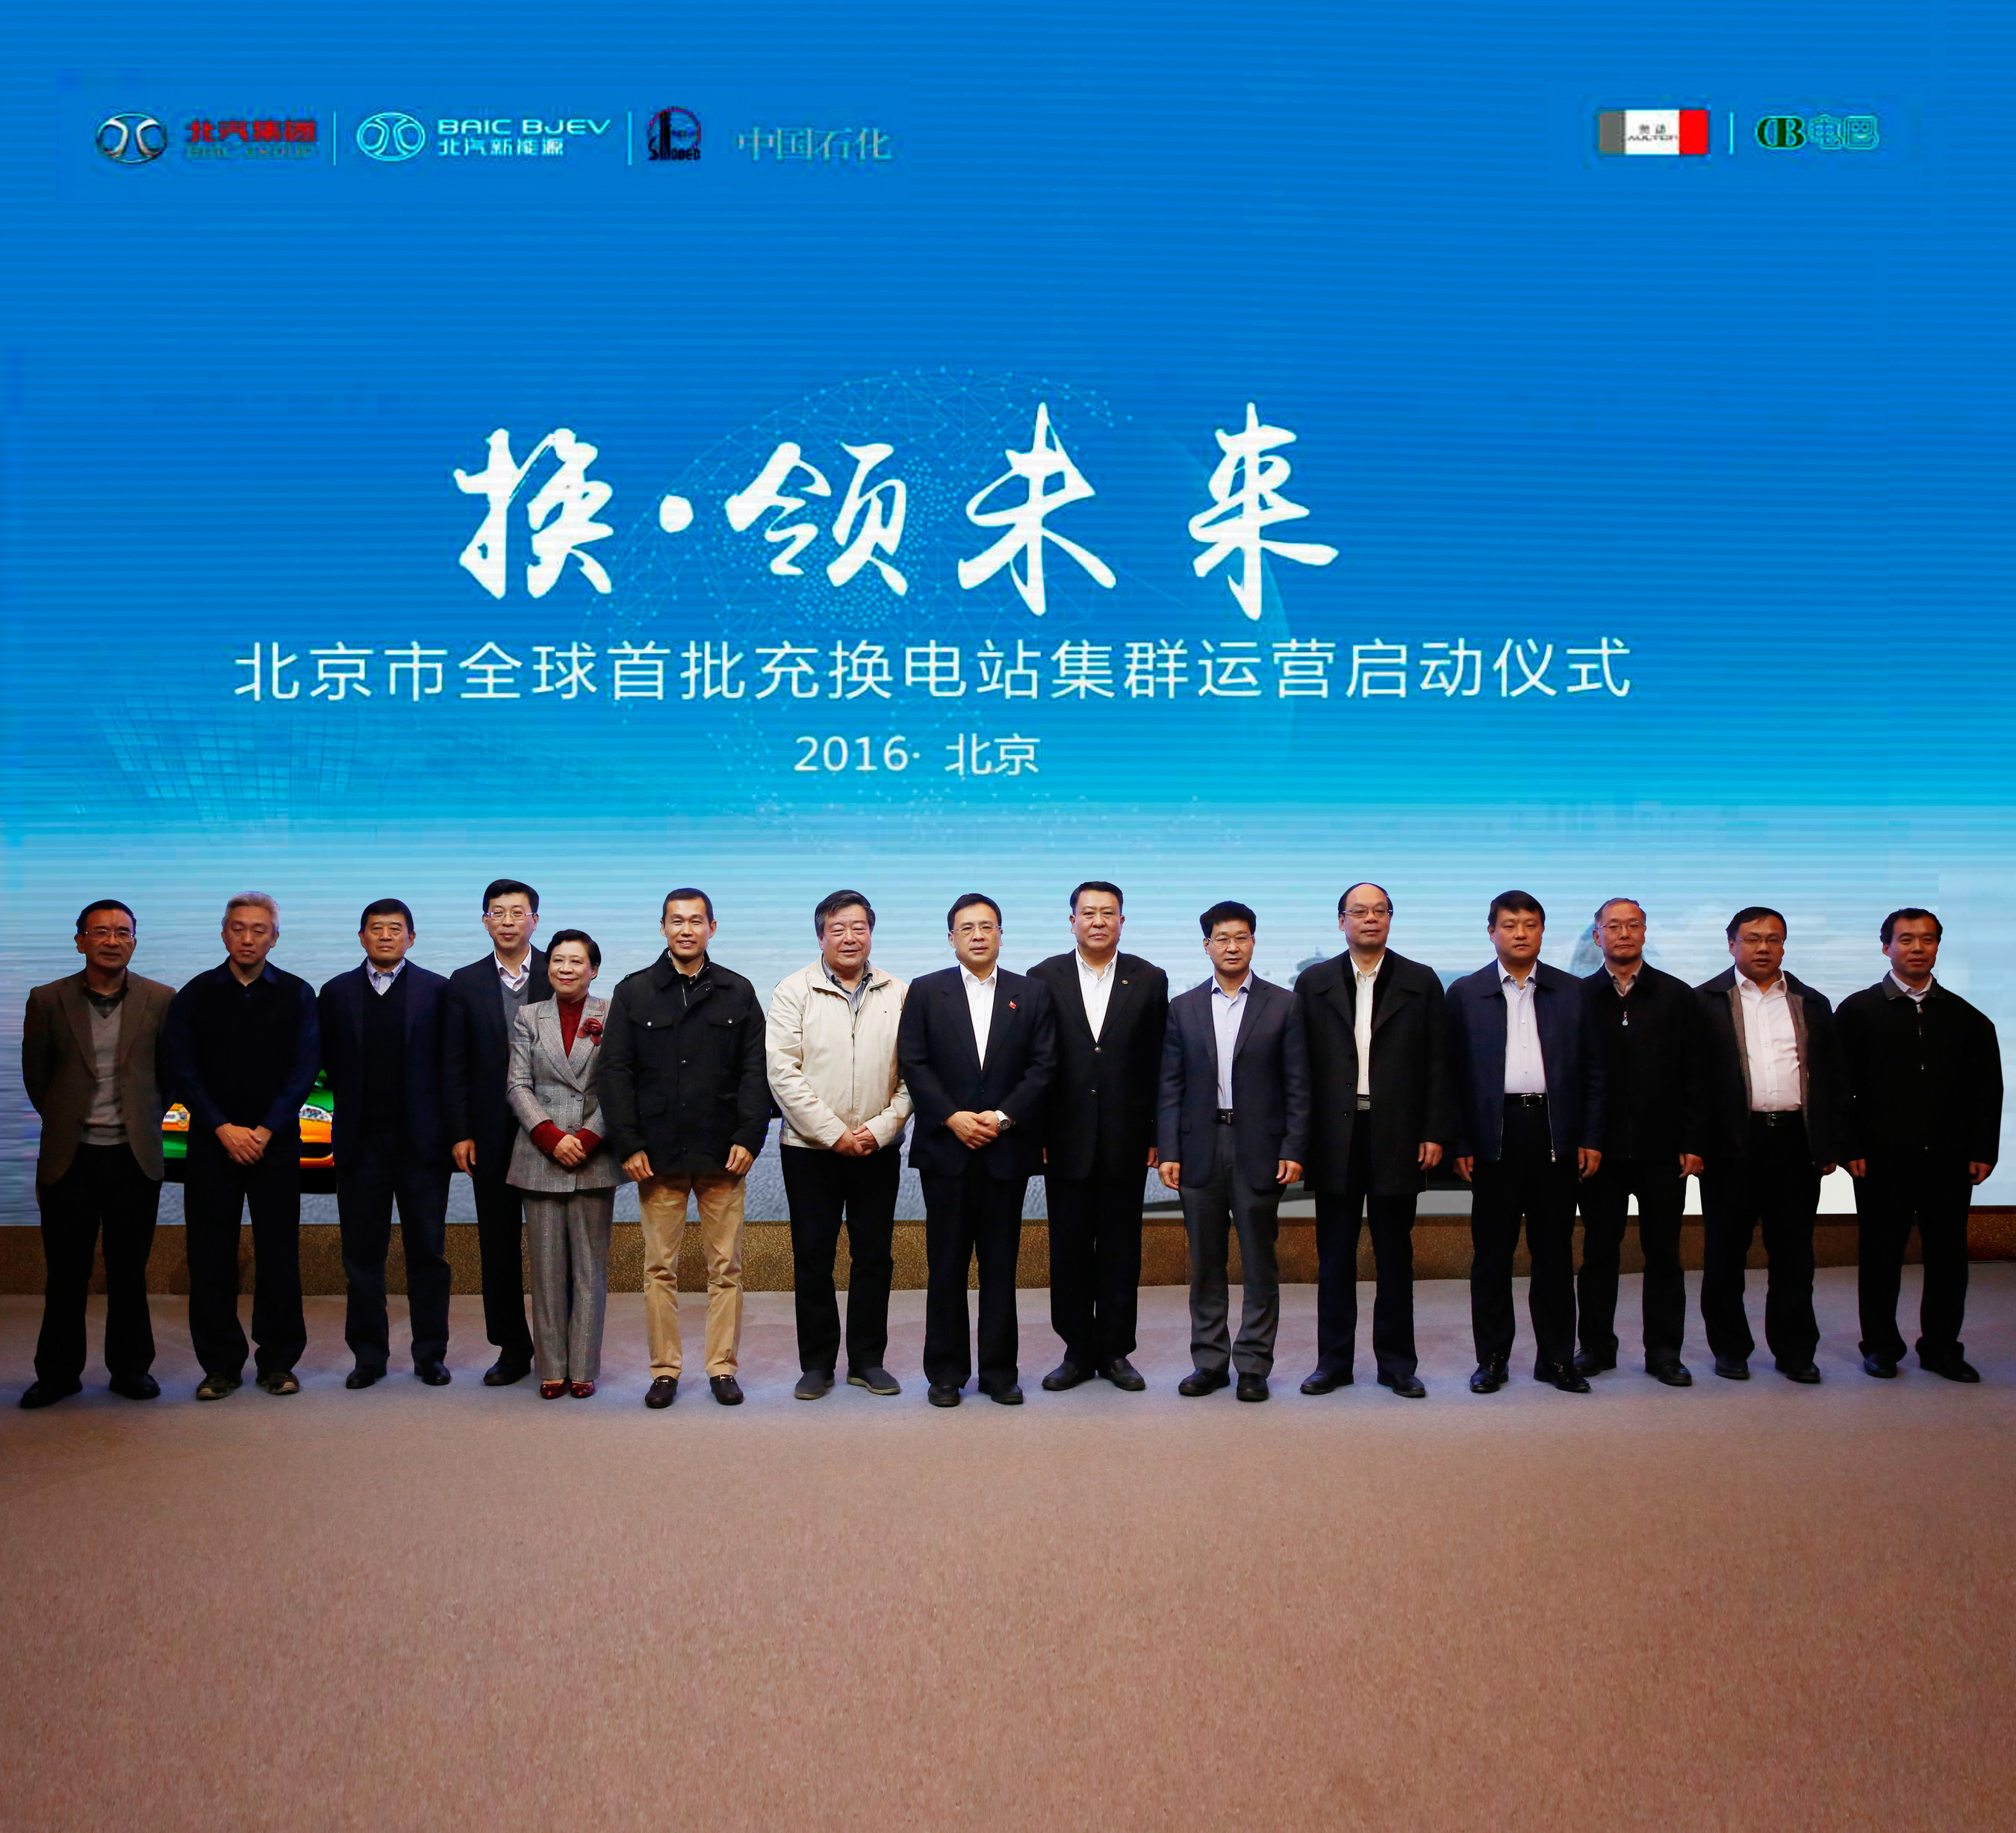 World's Largest Network of EV Battery Charging and Switching Stations Launch Ceremony